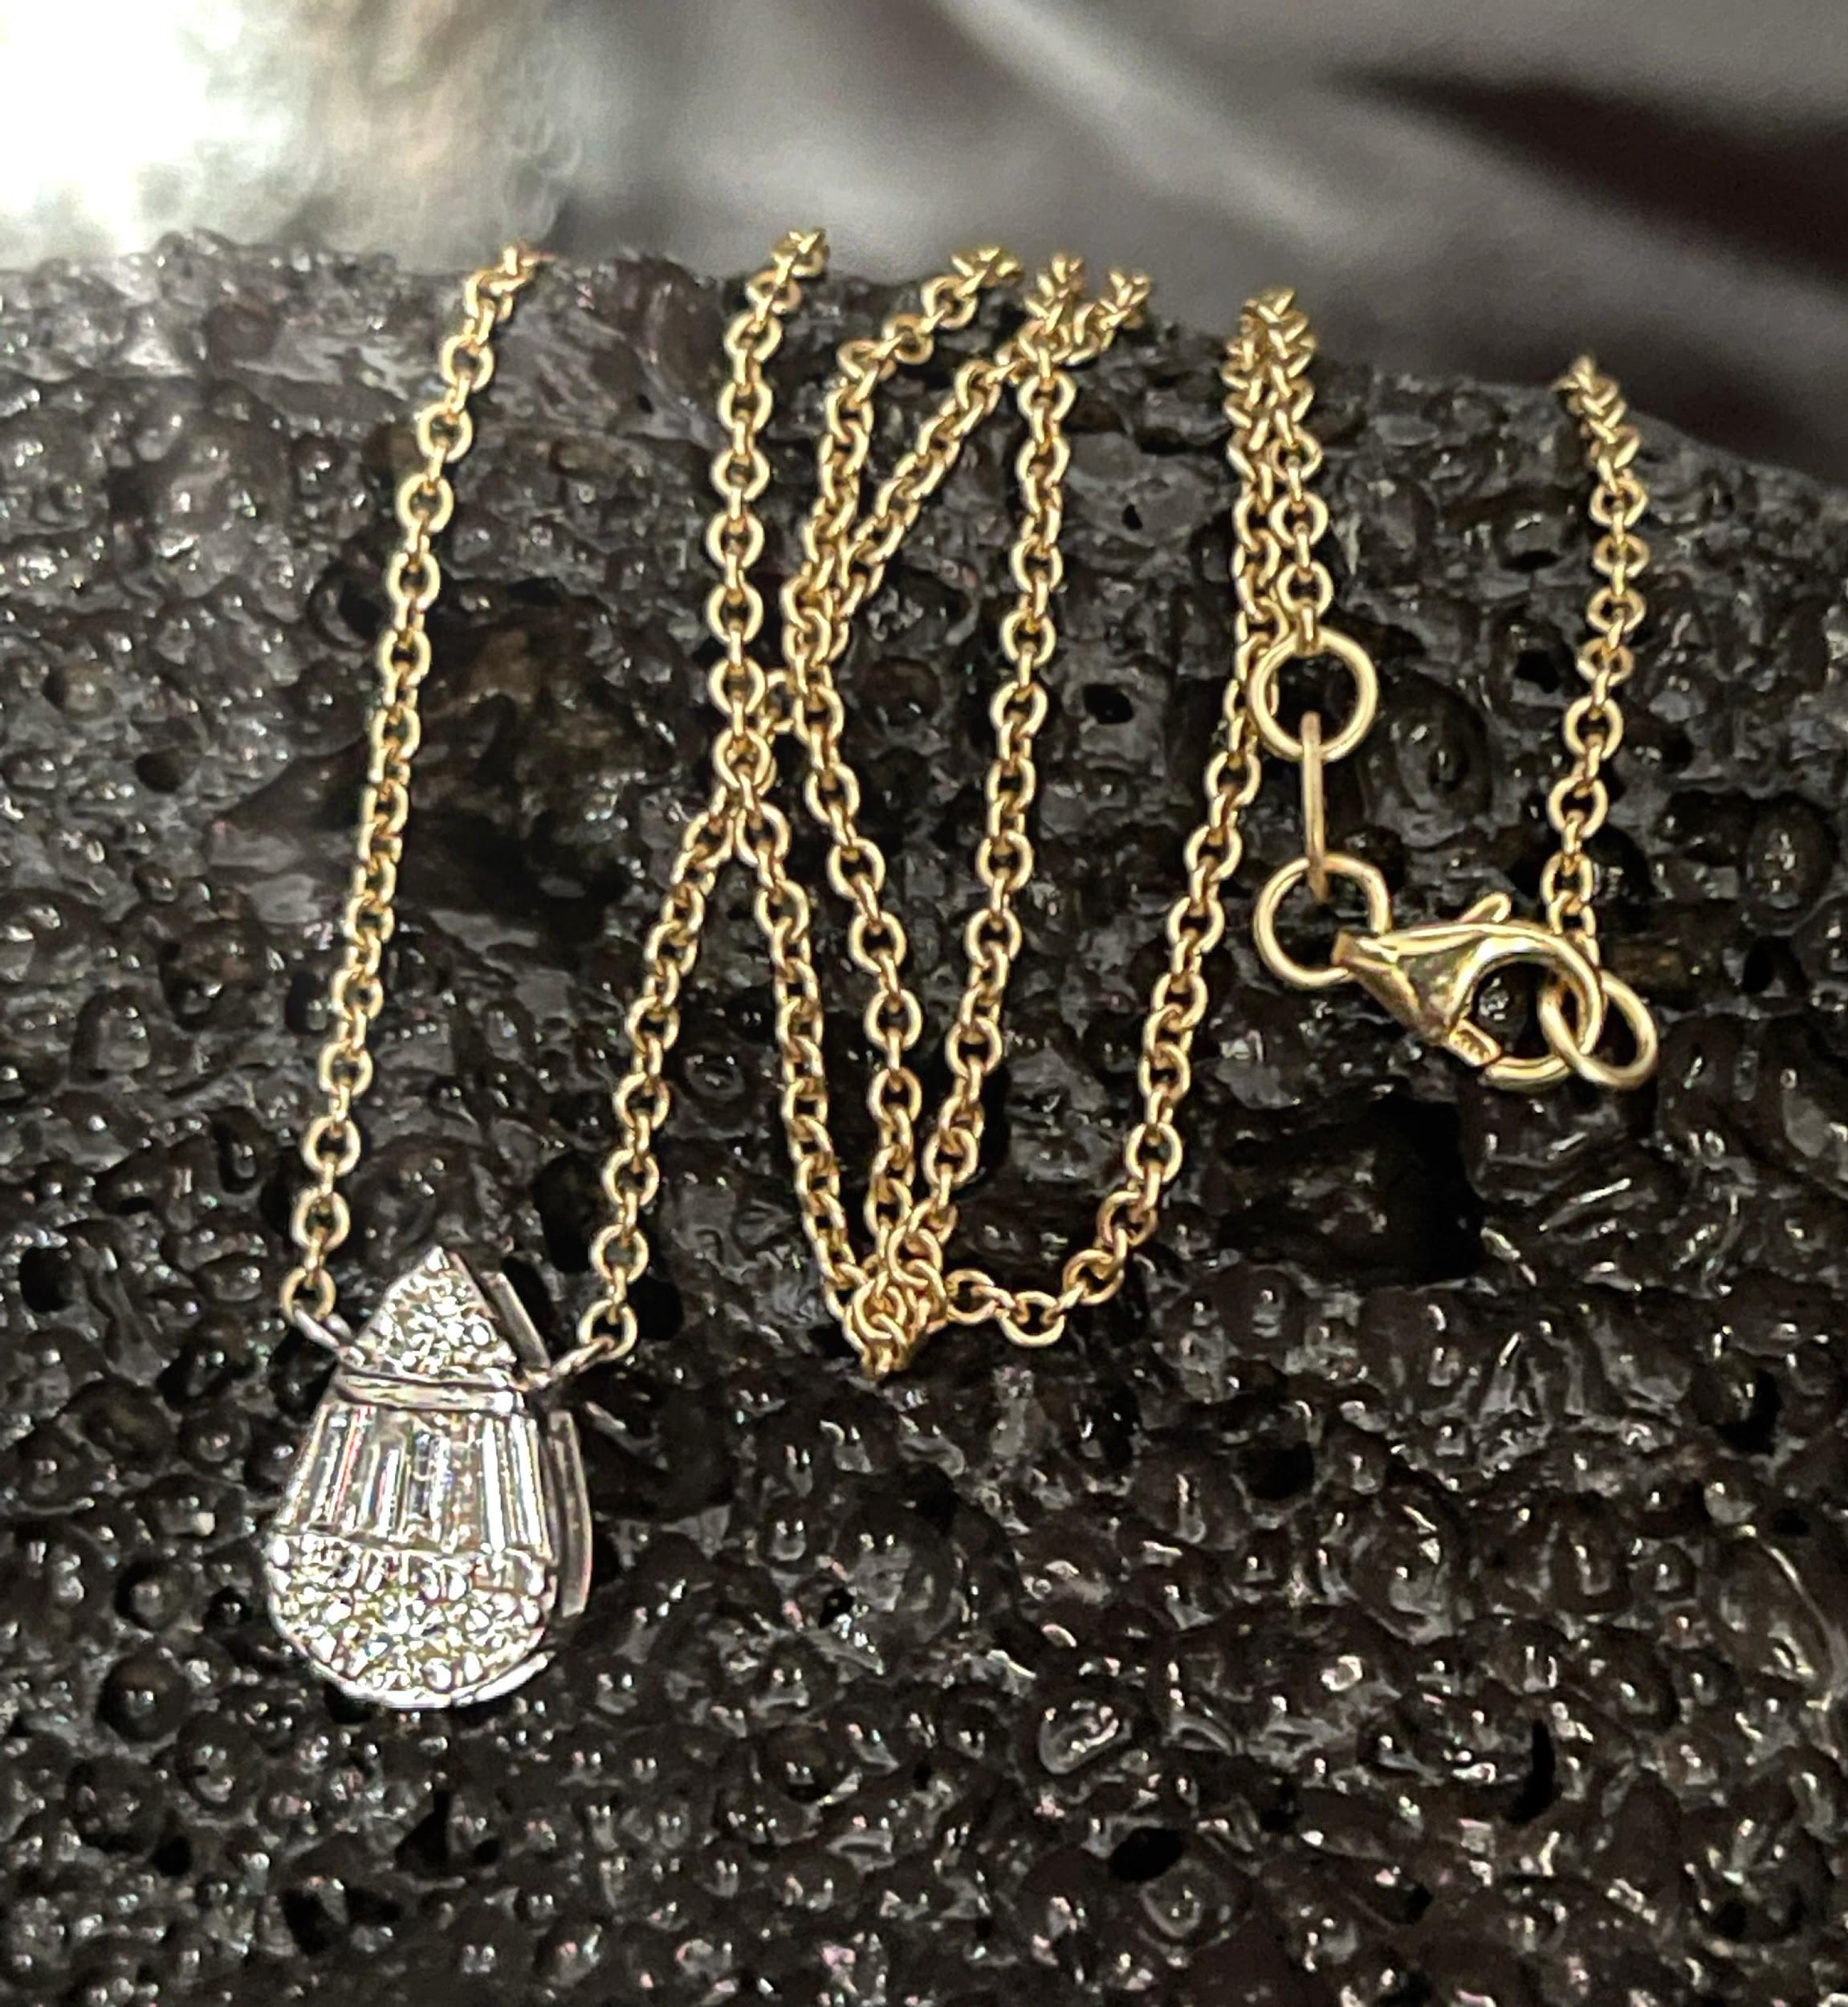 Note: Production time for this product is 4 weeks.

Gold : 14K Yellow Gold 3.78grams
Stone Type : Diamonds
Carat Weight : 0.43ttcw
Serial # : PD-0166

Presenting the perfect gift for any occasion, this pear-shaped diamond pendant necklace is a truly